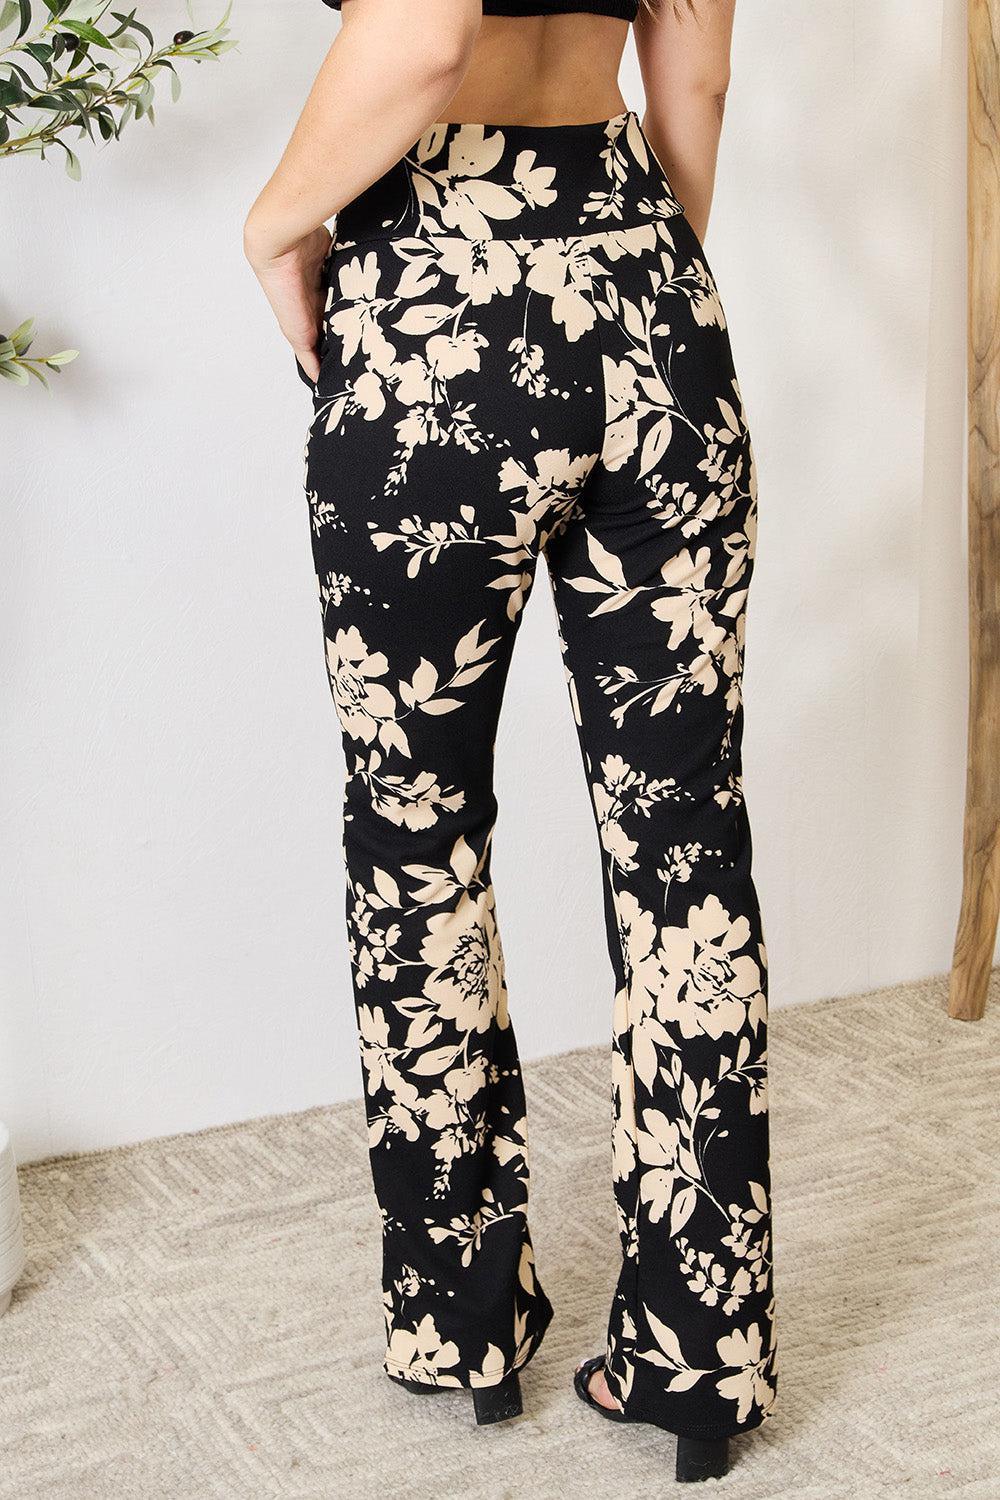 a woman in a black top and floral pants